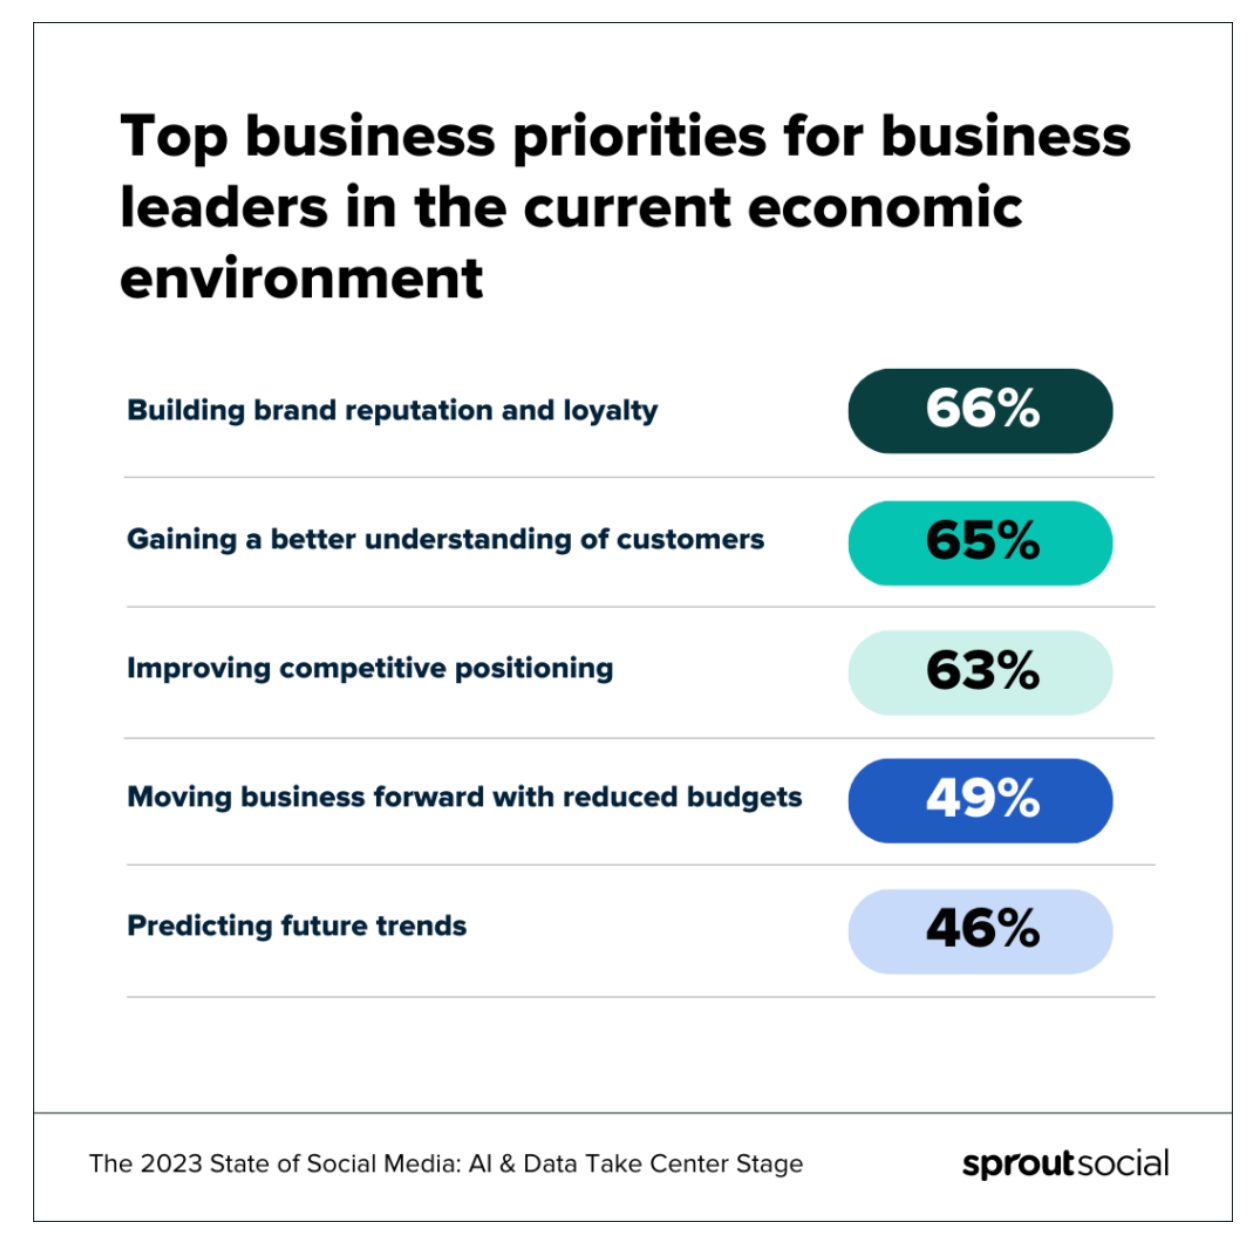 business priorities for business leaders in the current economic environment